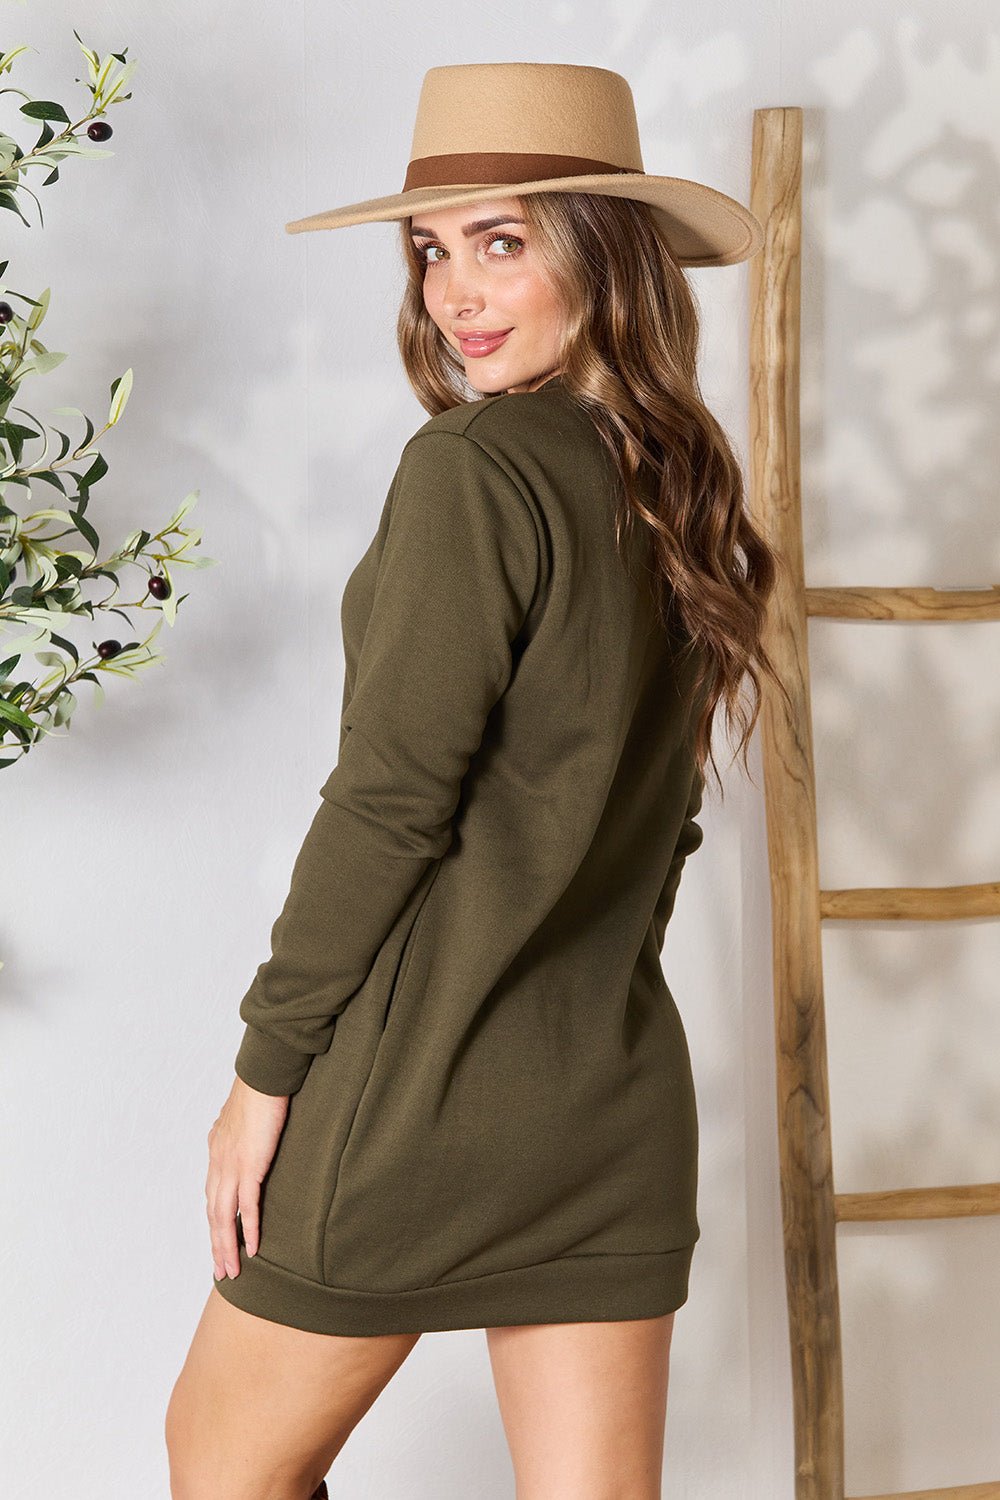 Double Take Round Neck Long Sleeve Mini Dress with Pockets - BloomBliss.com